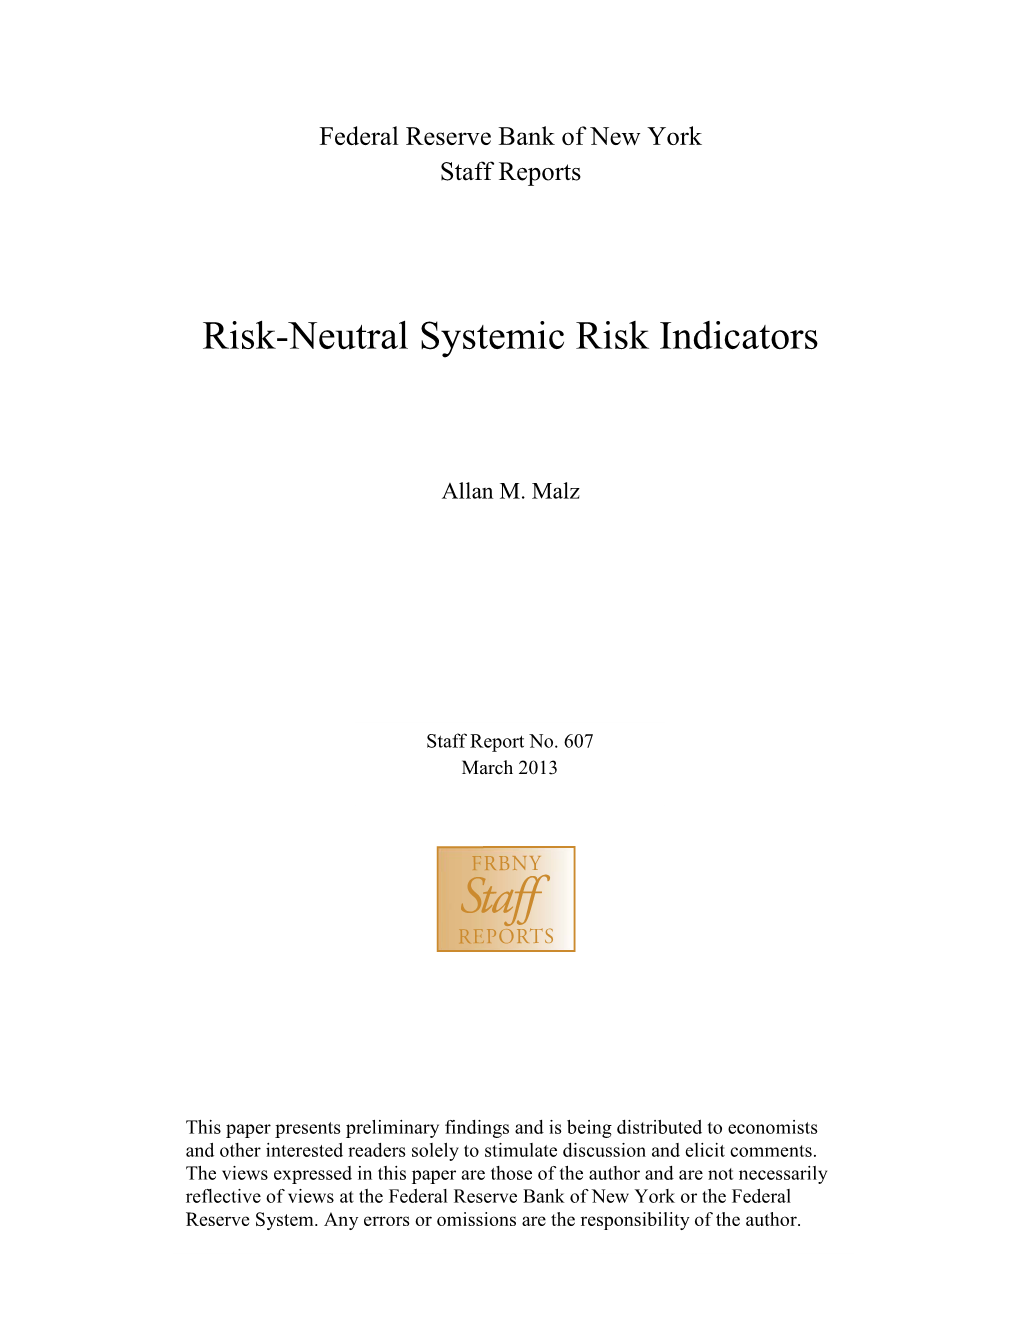 Risk-Neutral Systemic Risk Indicators